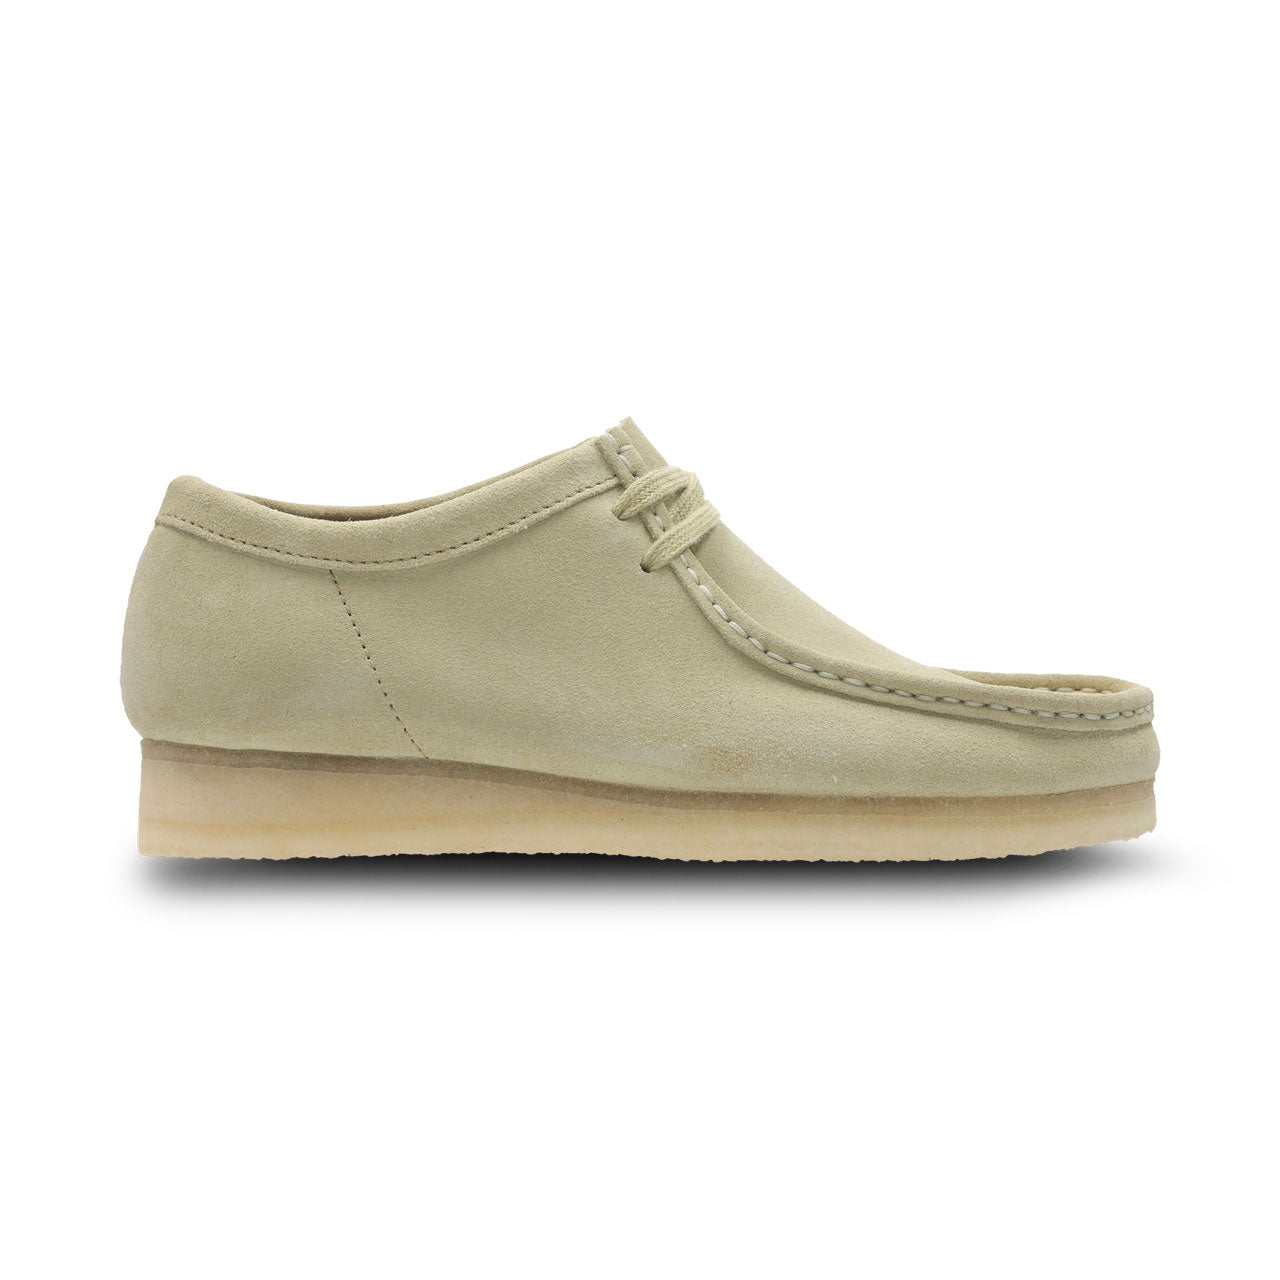 Clarks Wallabees | Uncrate Supply